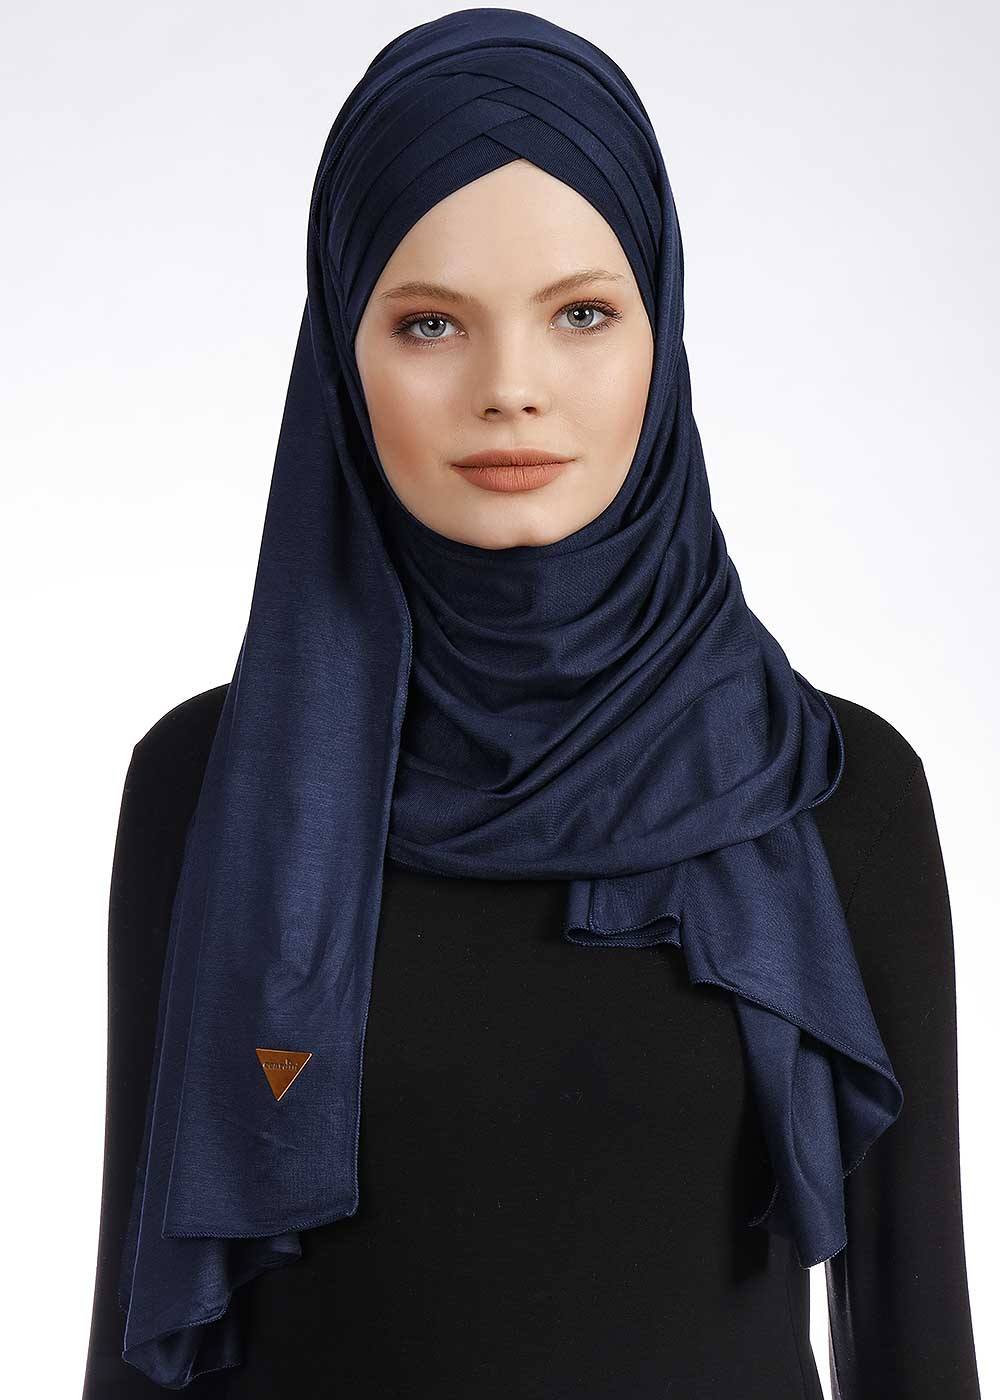 Deanna ديانا on X: Justice, clothing retailer for girls, includes a hijabi  in their ad. #hijab  / X